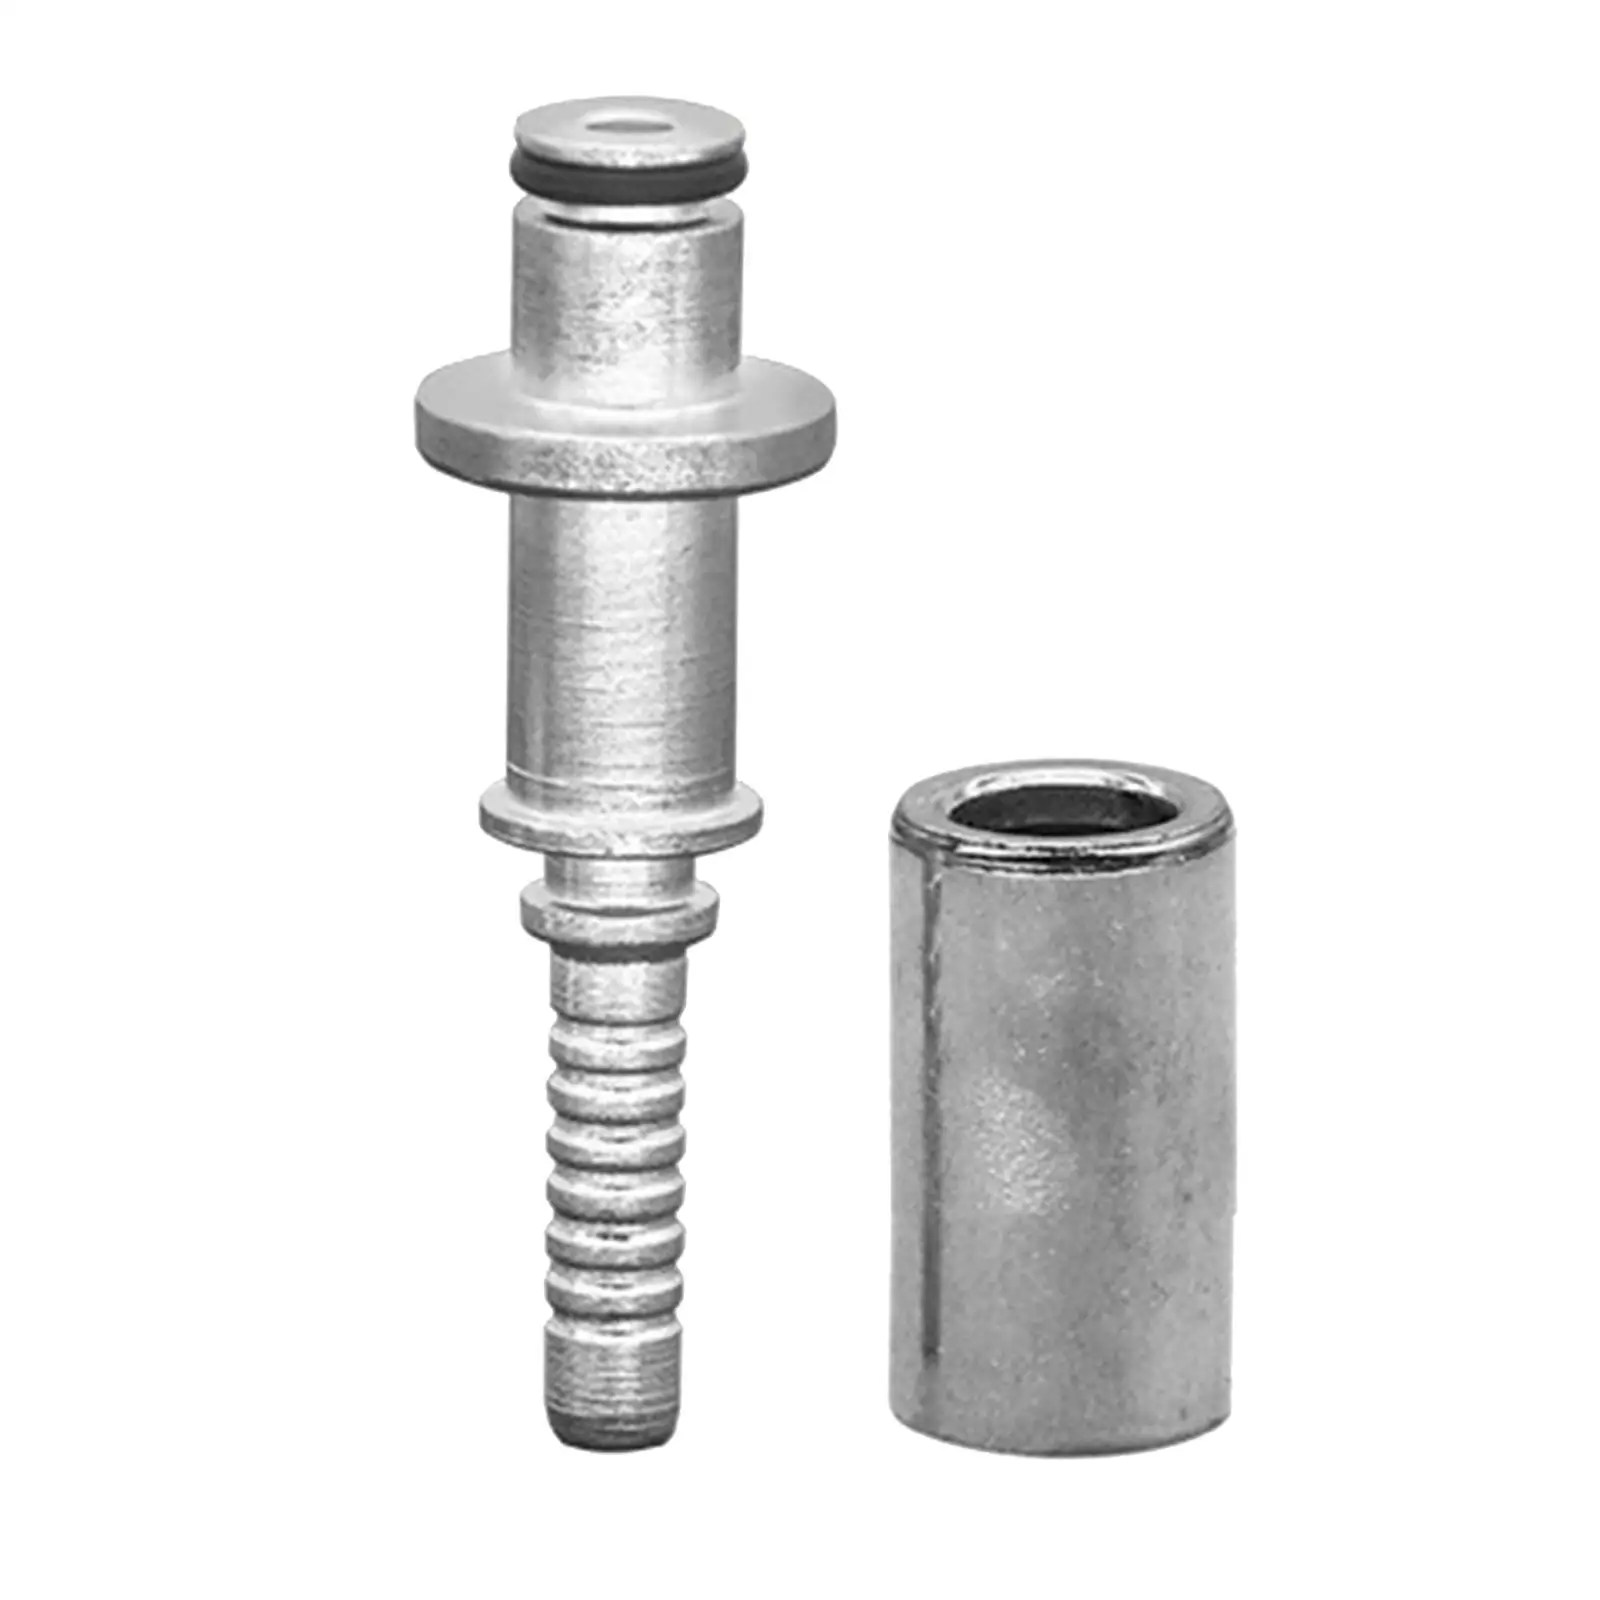 Car Washer Pipe Joint Fittings Tools Accessories Hose Fittings Washer Hose Connector Converter Connector